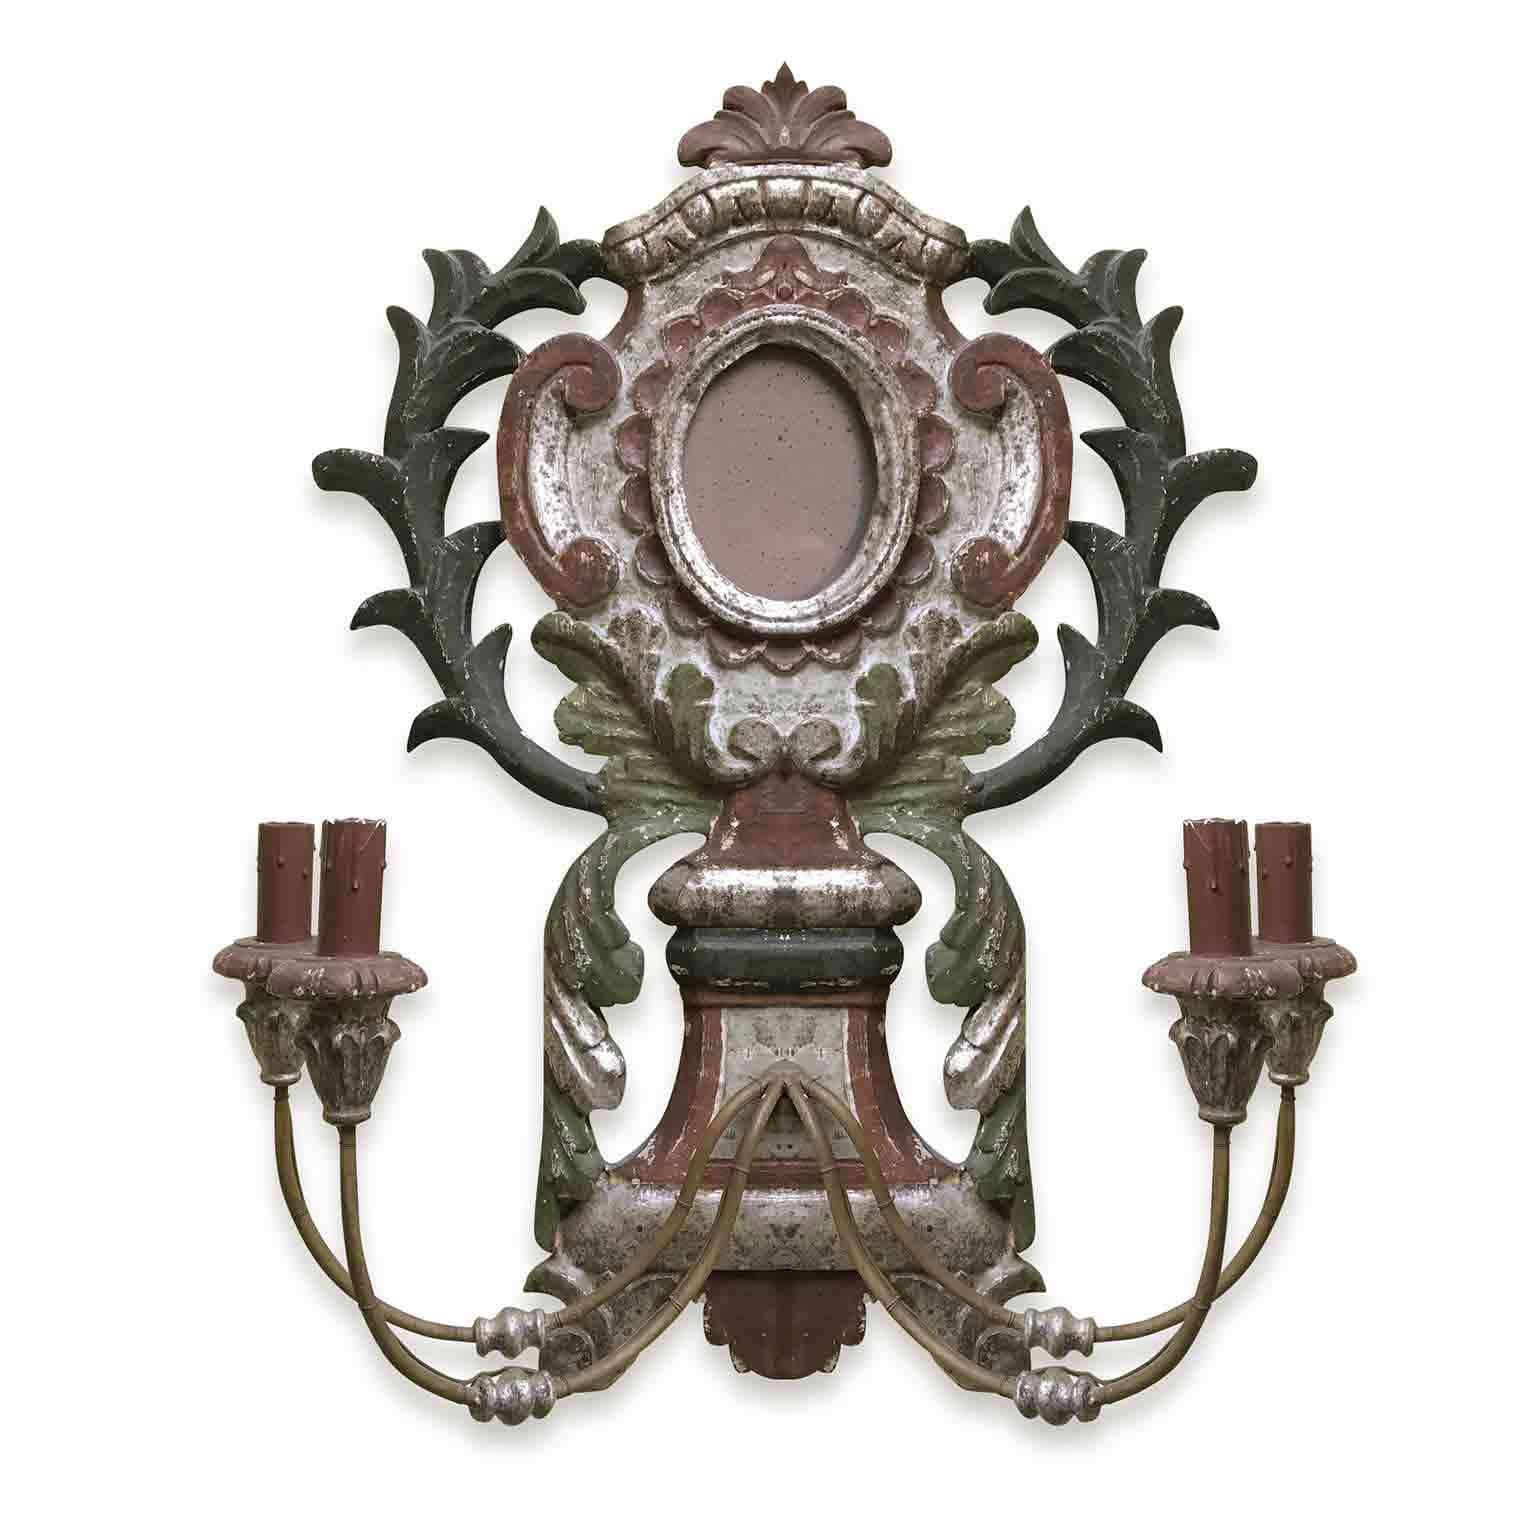 A  20th century pair of decorative Italian Florentine sconces, foliate hand-carving, four armed mirrored wall lights, large size polychrome sconces painted with bordeaux and green accents and silver-leaf mecca finish by Bartolozzi & Maioli in